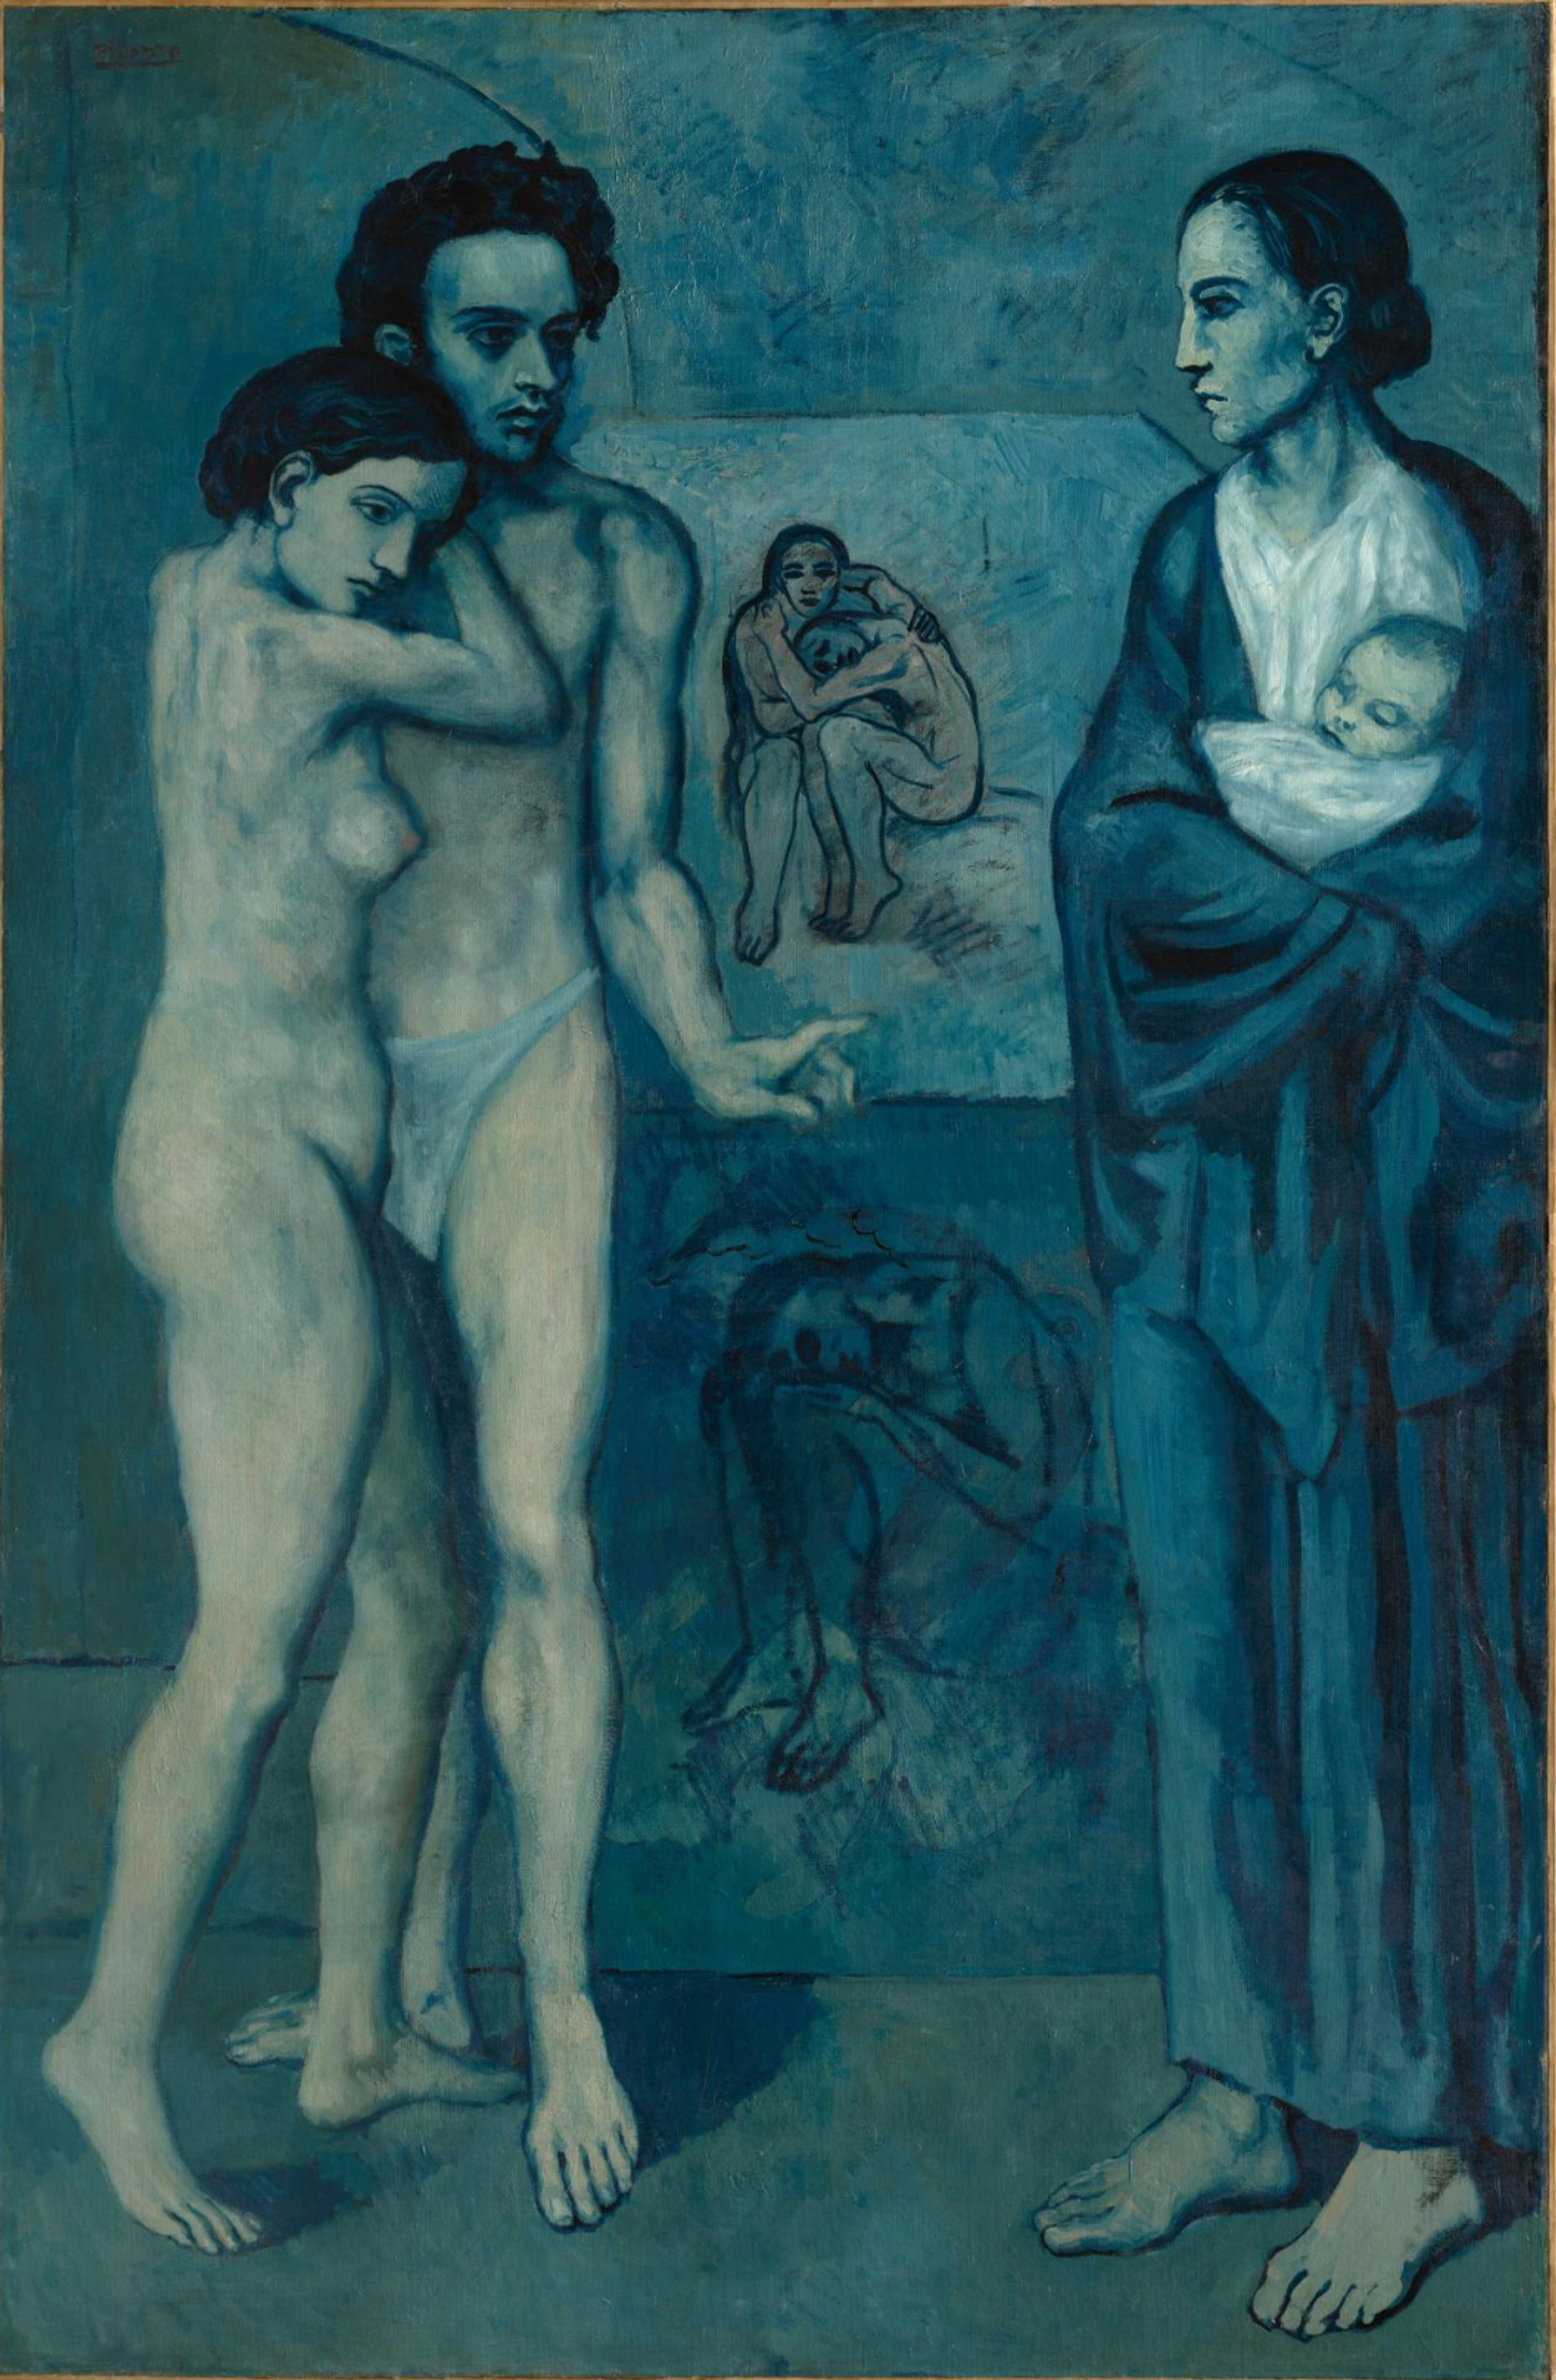 Painting by Pablo Picasso in a limited blue-green, cool toned palette. Two couples are depicted, a man and a woman, and a mother and baby. They stand in a room with two paintings, one depicting a couple and the other depicting a sorrowful lone figure.